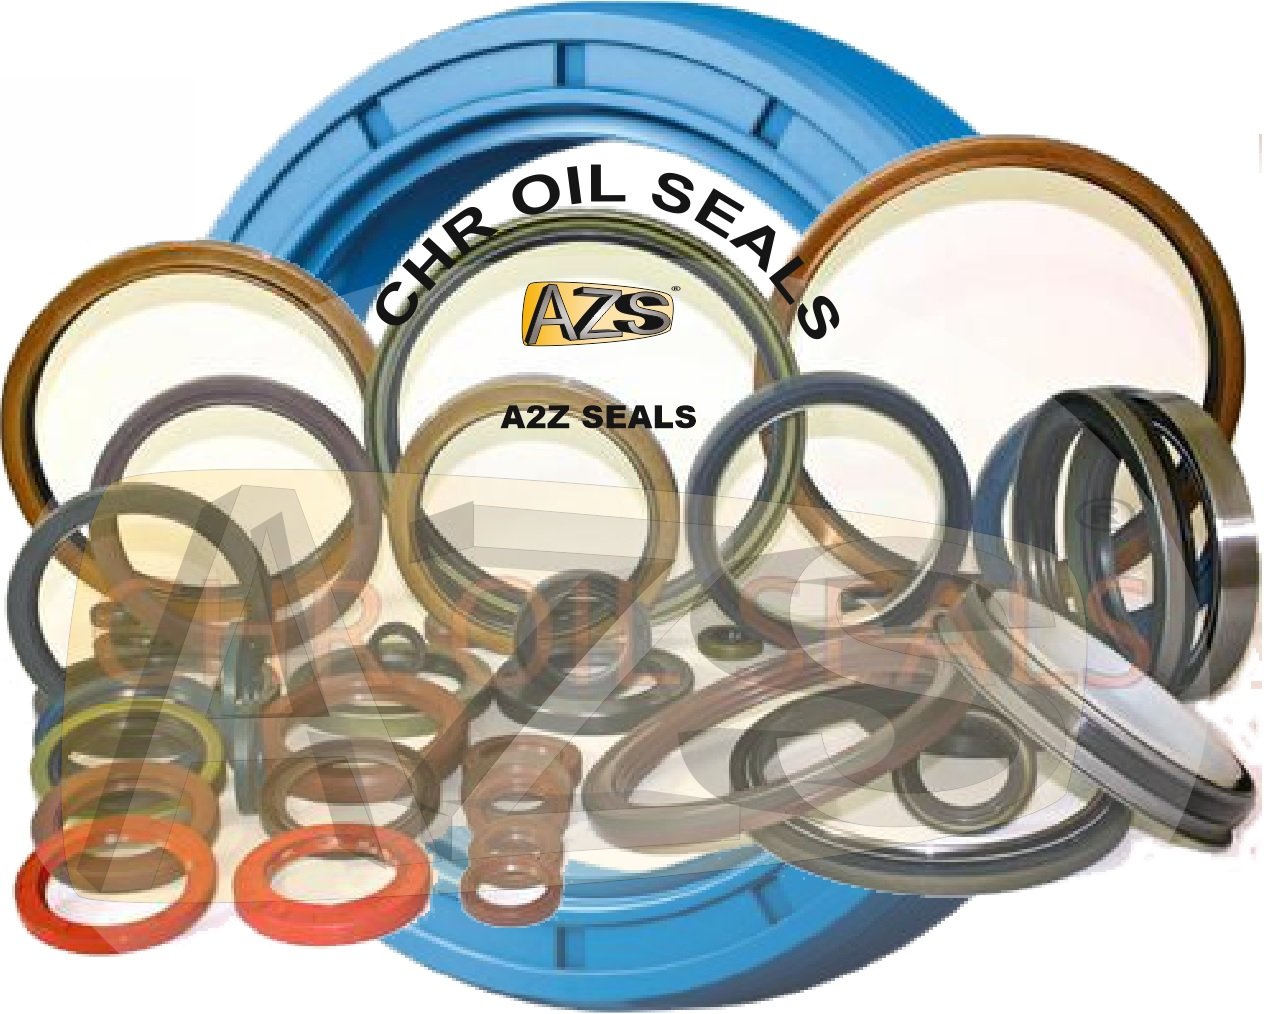 High-Quality CHR Oil Seal - Get Yours Now at A2Z Seals!